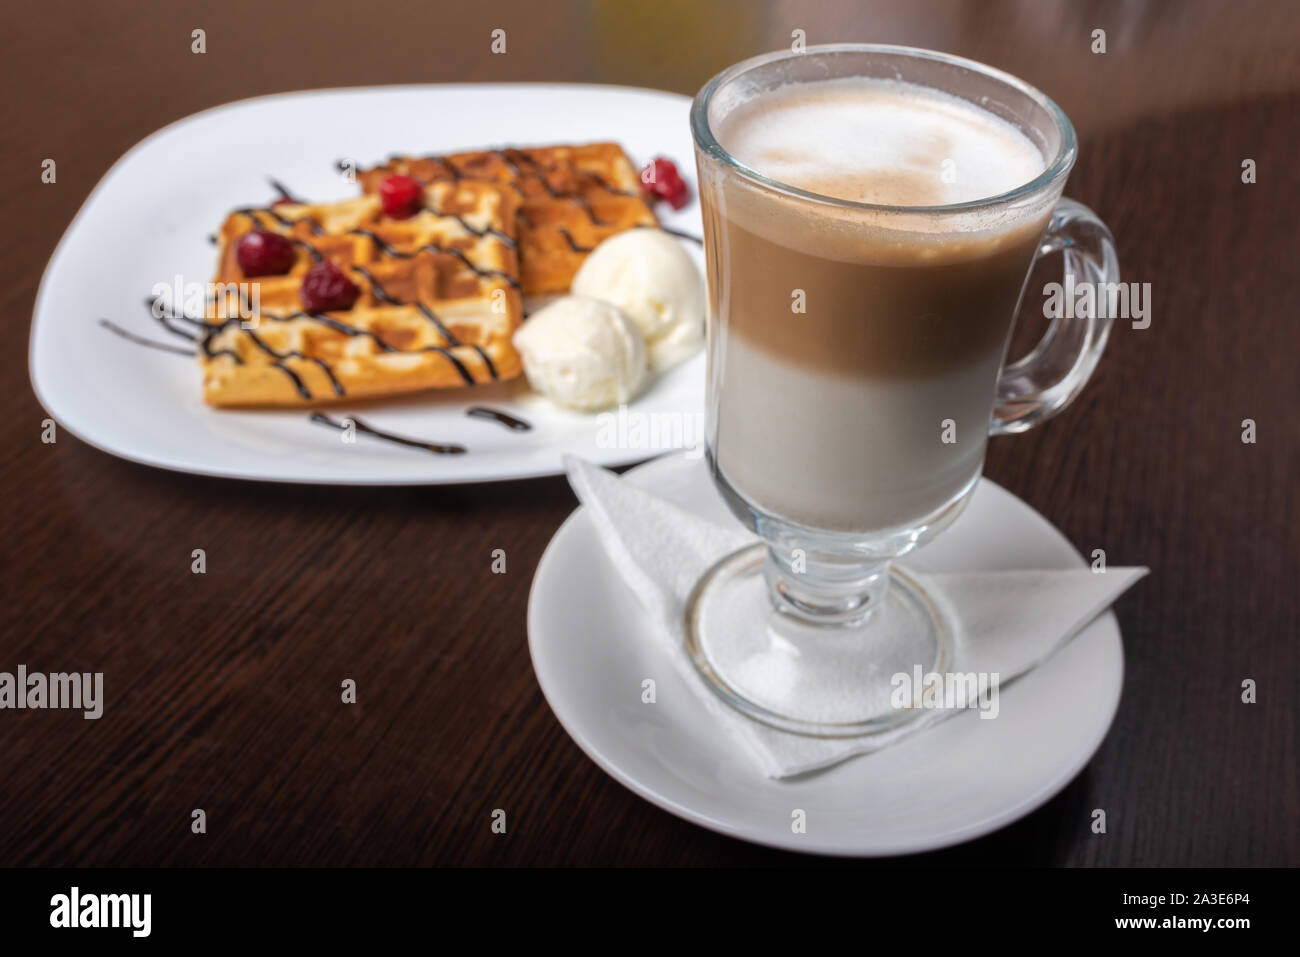 Viennese waffles with latte coffee, on a wooden table. Stock Photo